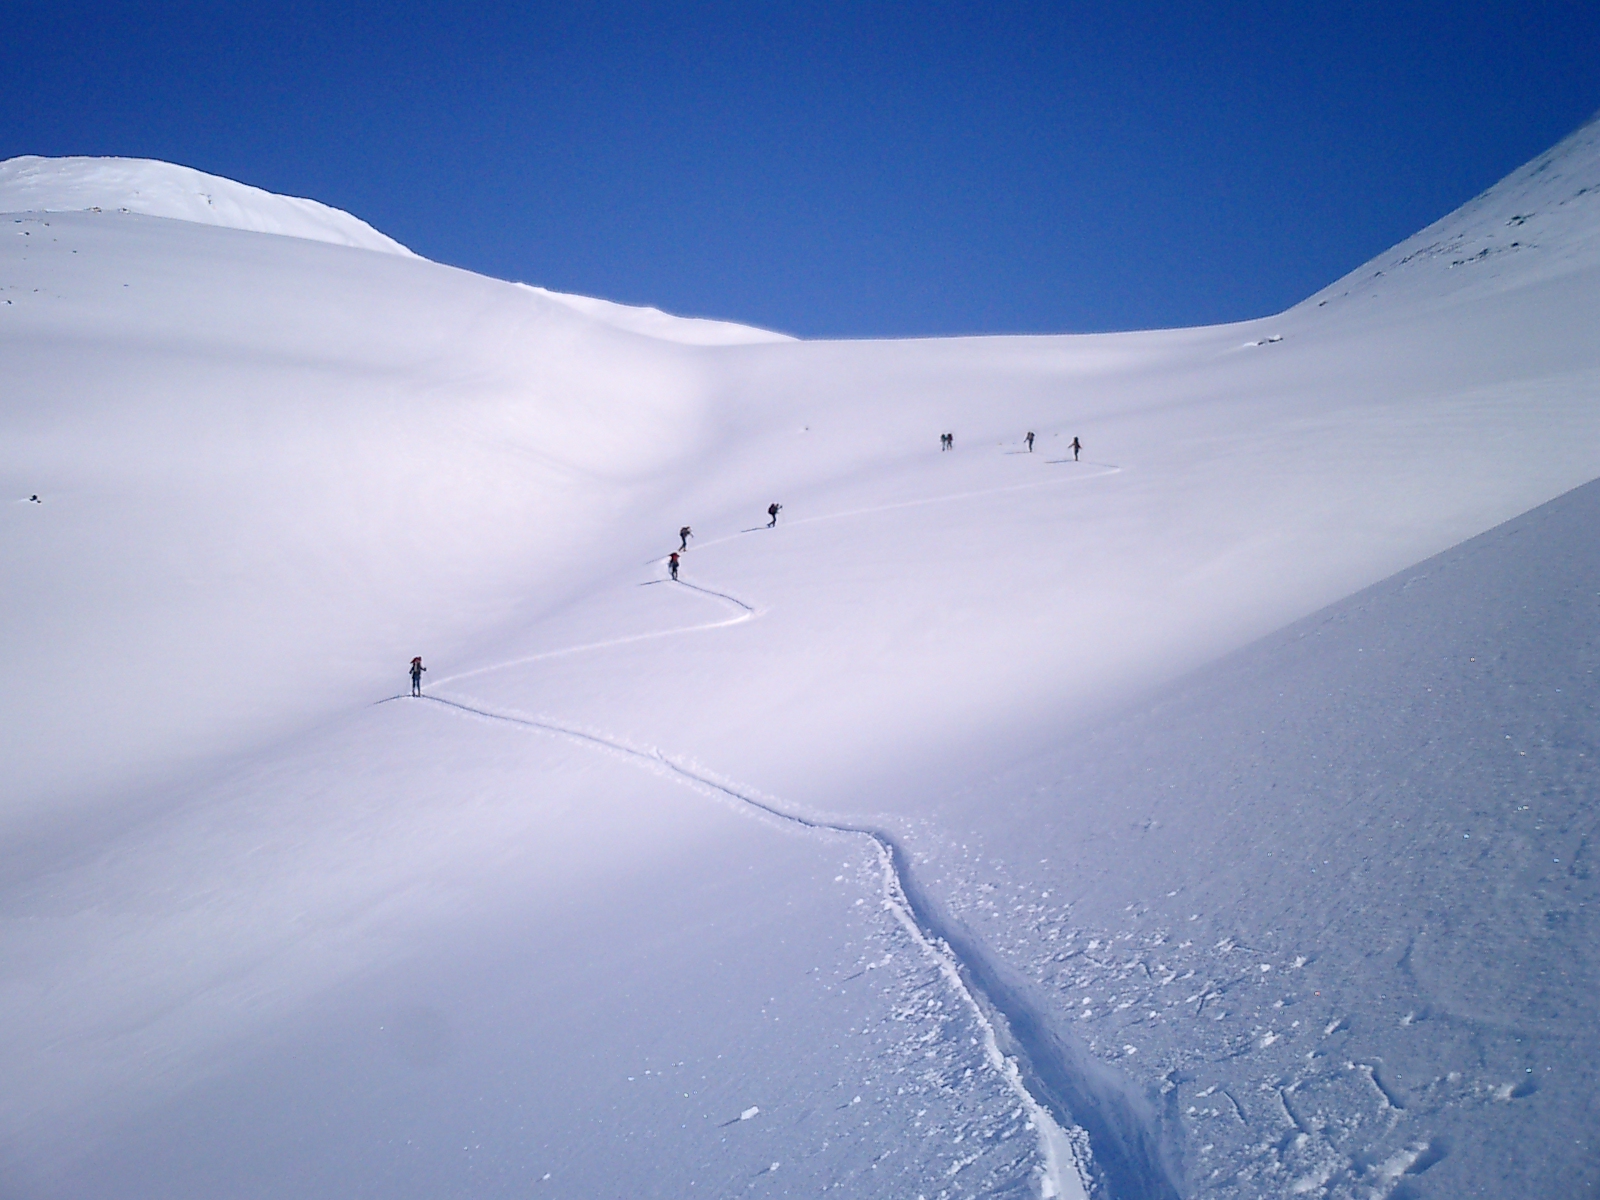 New trail in Powder snow. Photo: Andreas Bengtsson